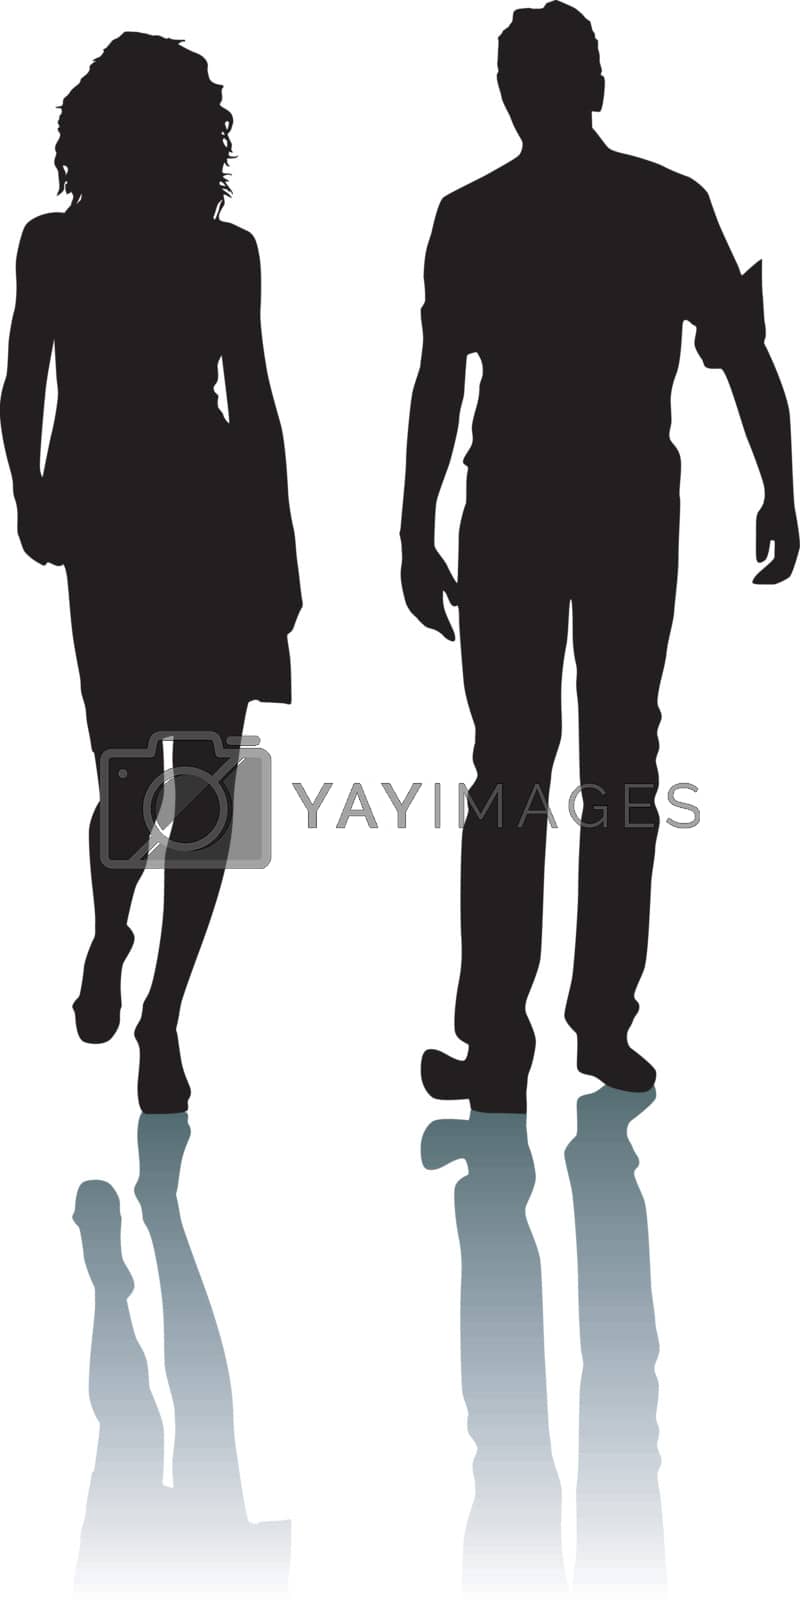 Royalty free image of Silhouette fashion woman and man by sattva